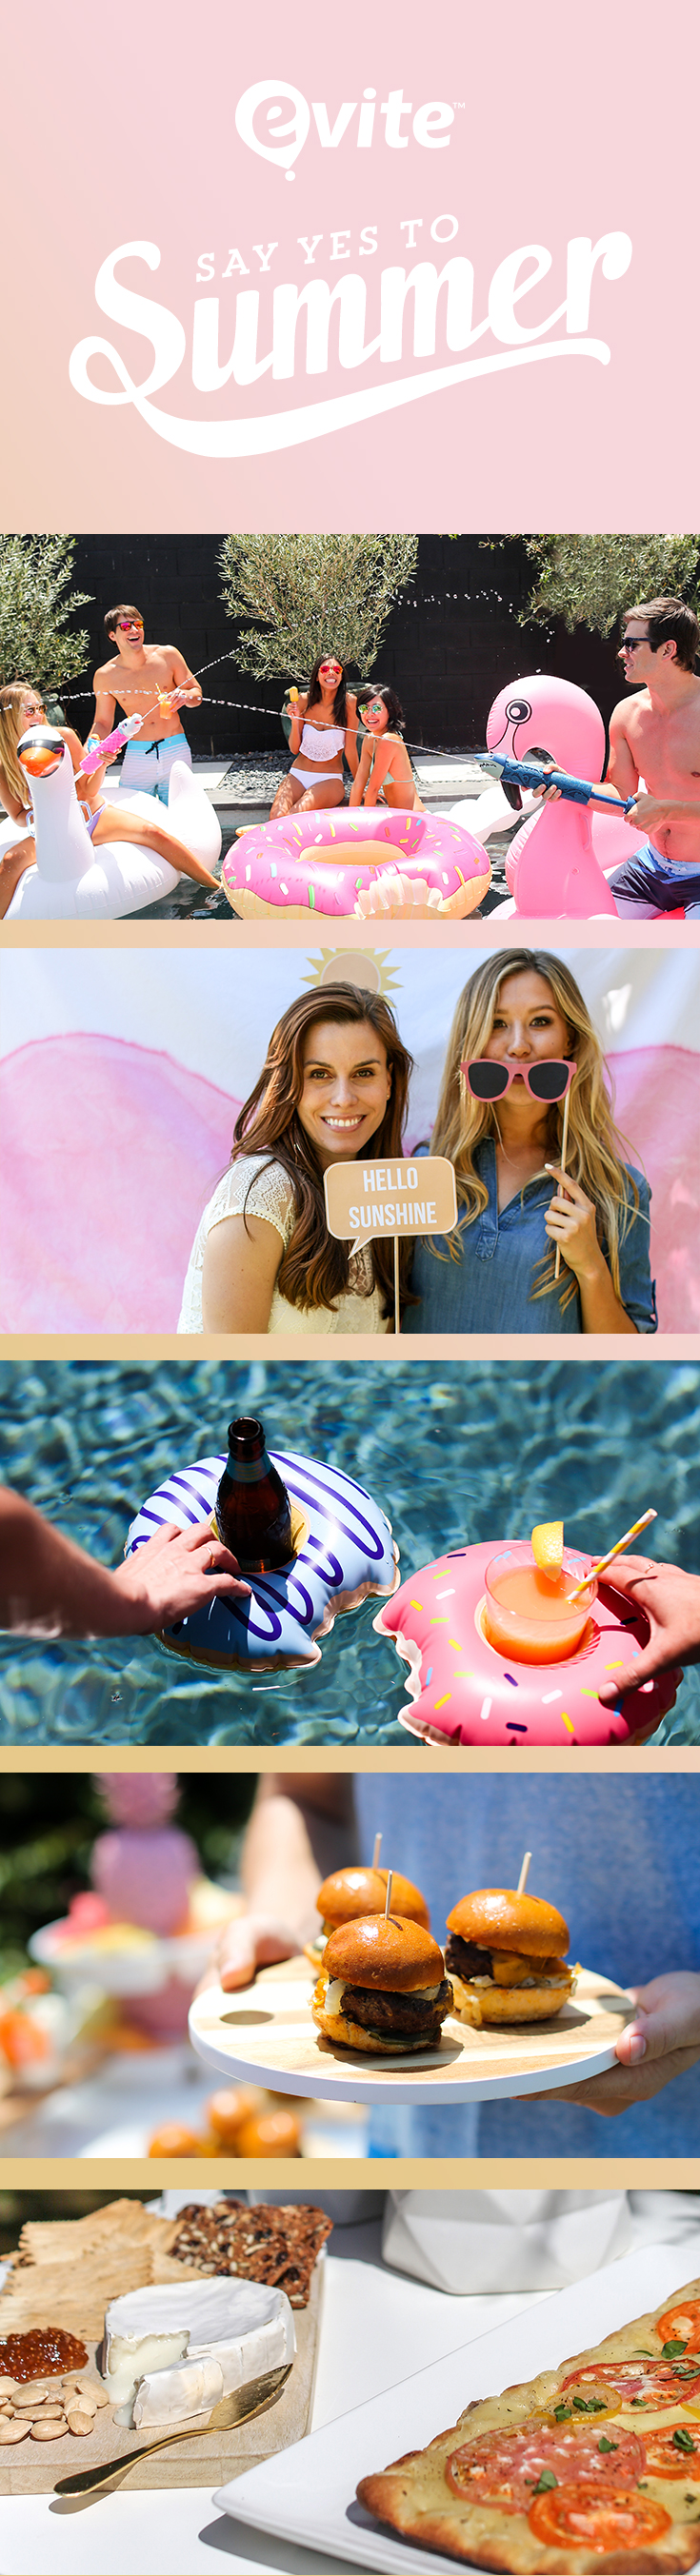 If you haven't already, it is time to get out the calendar and plan some fun activities to maximize your summer time. Here are 5 ways to say yes to summer! #BeThere #Evite #AD